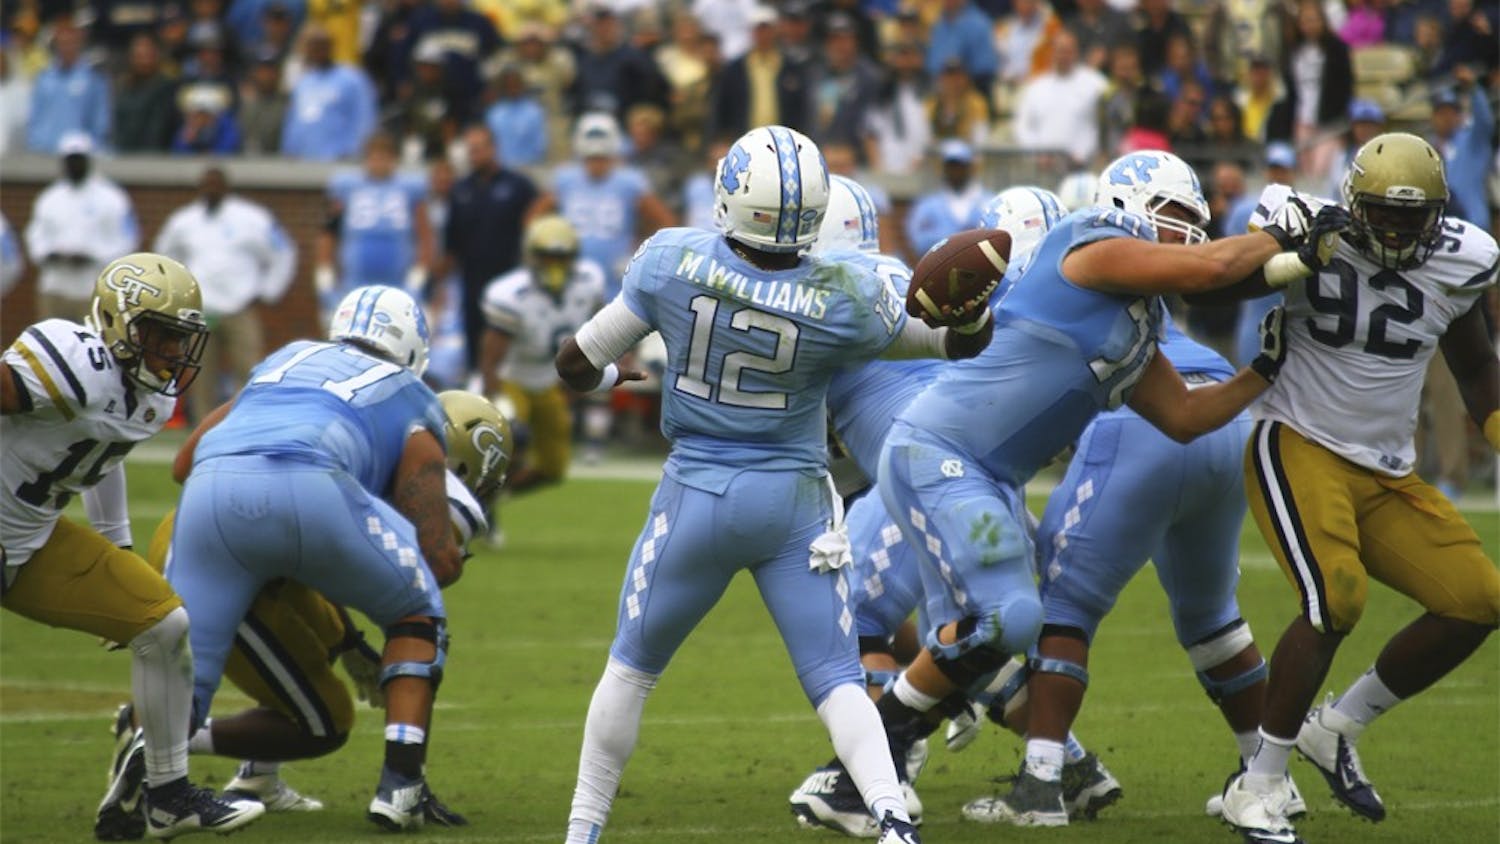 The UNC football team pulls off an amazing win over Georgia Tech